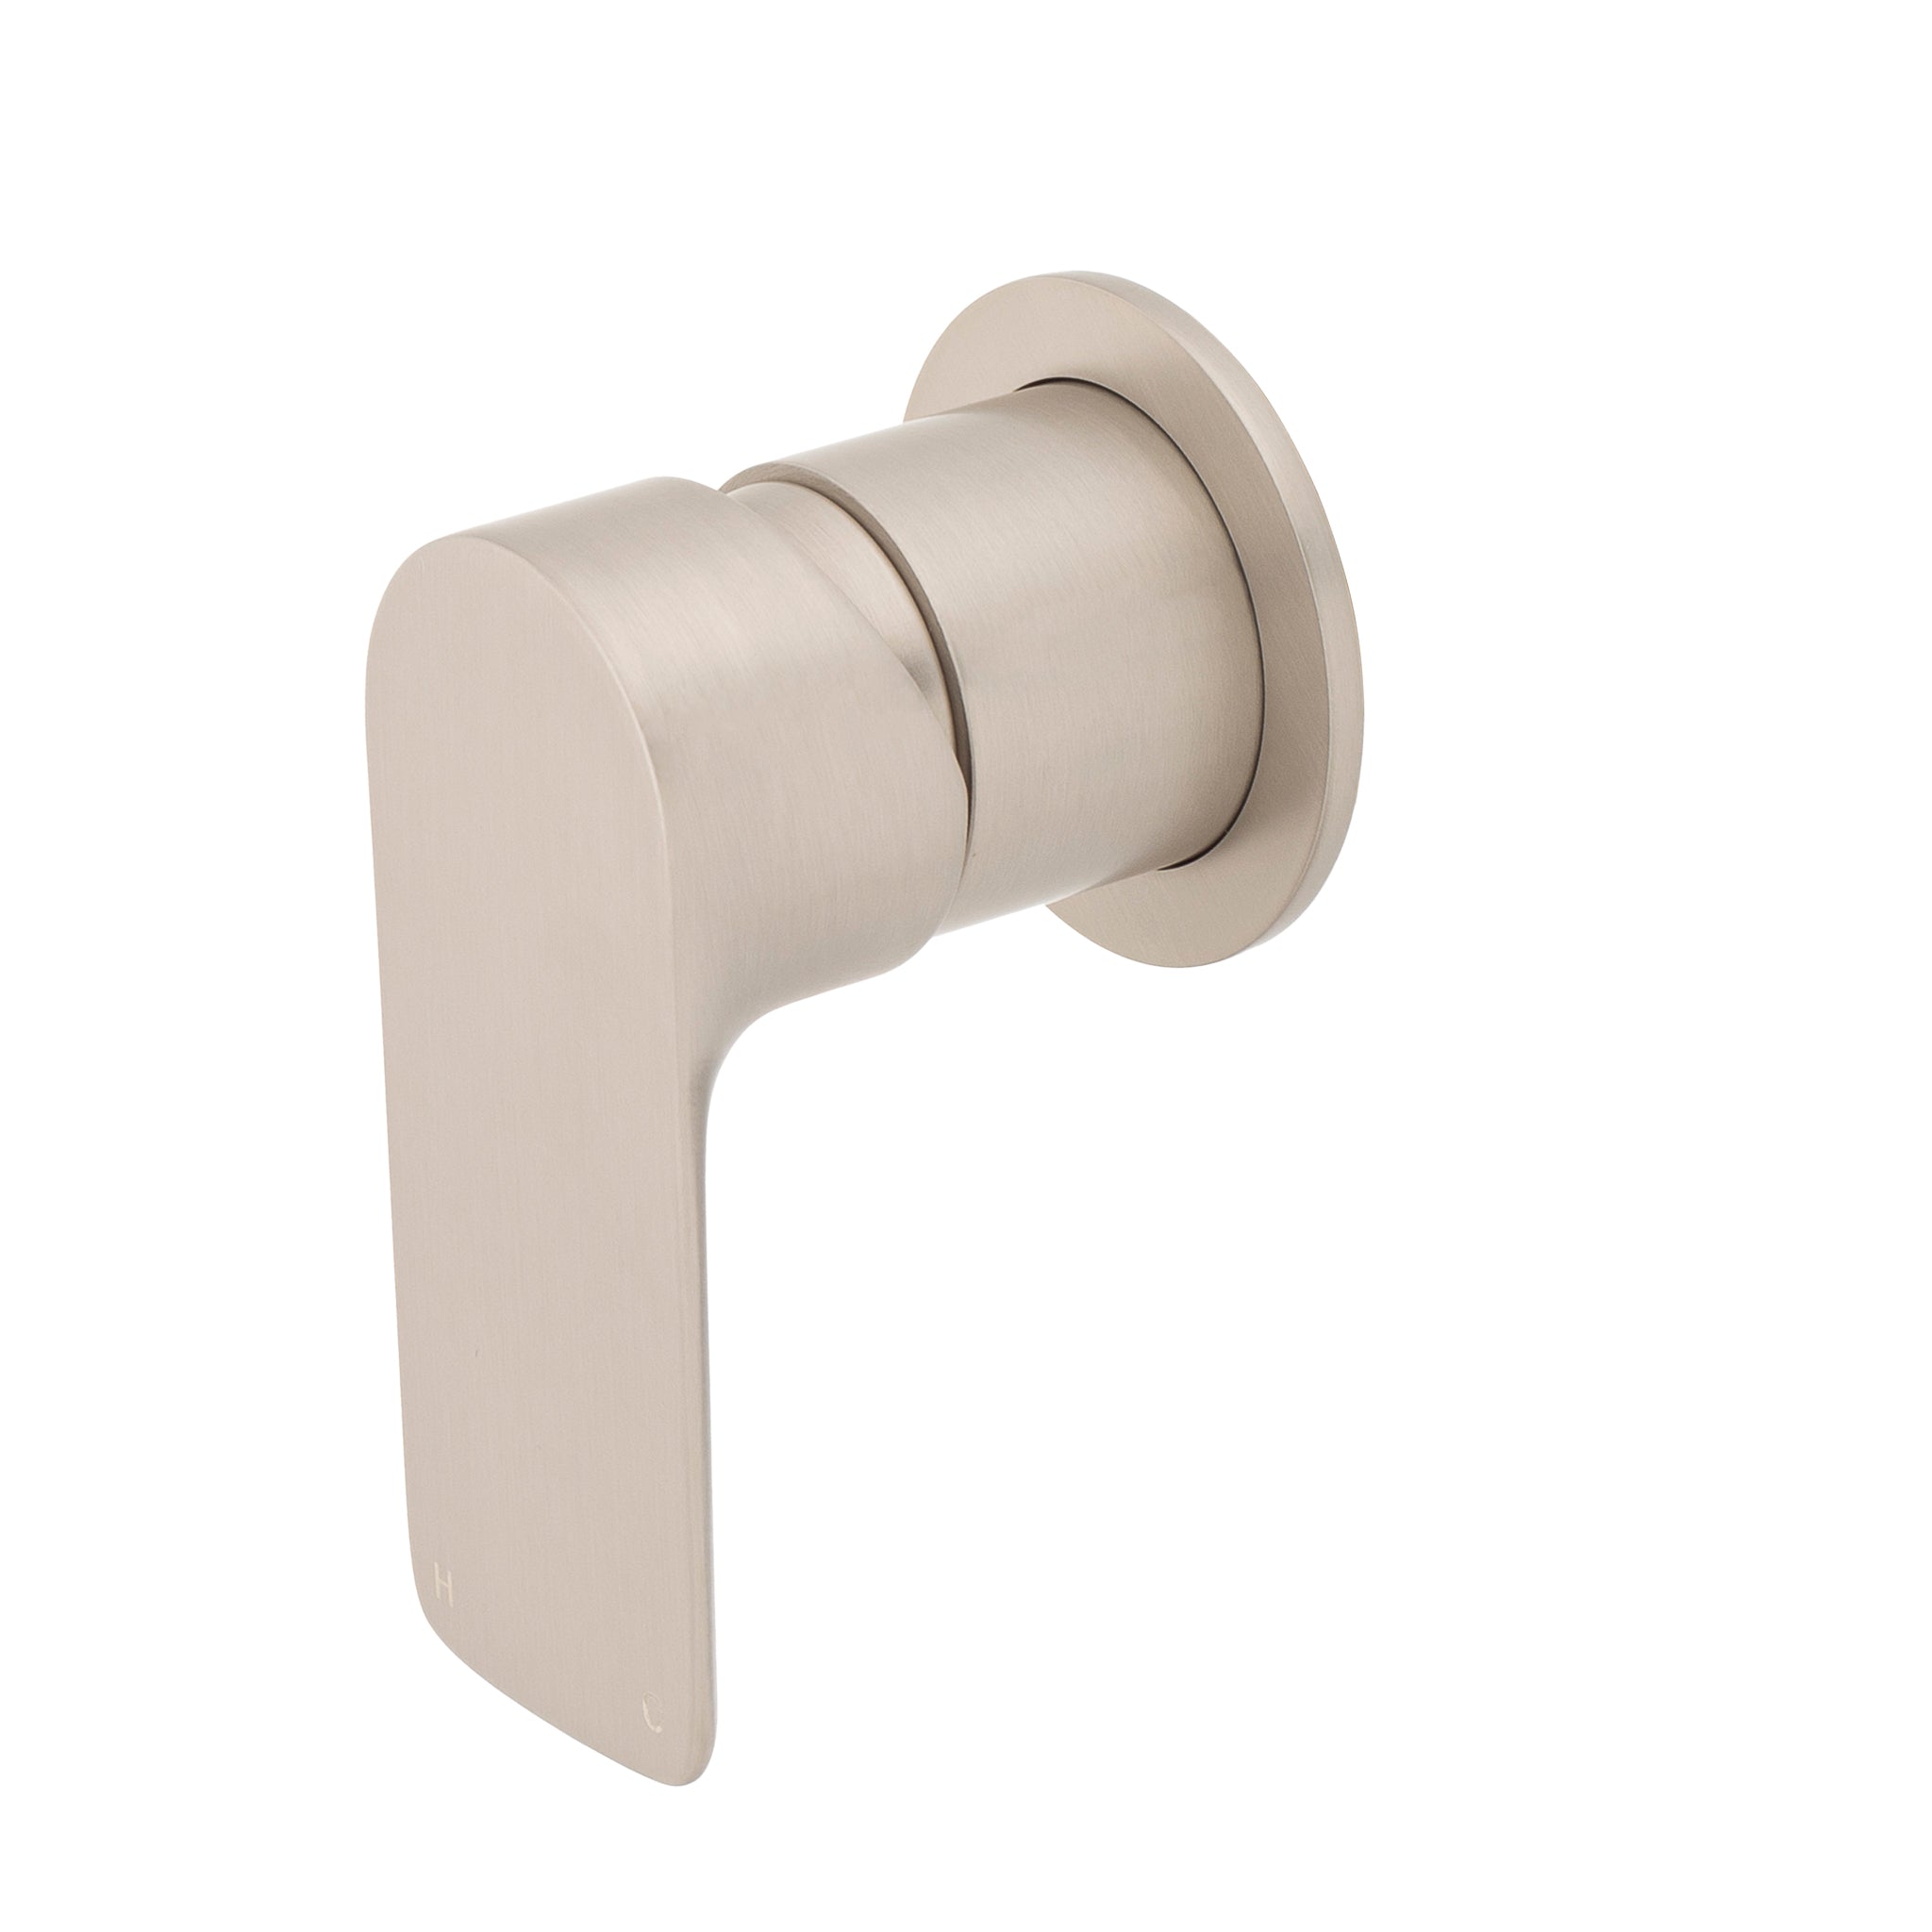 Jena Shower/ Bath Wall Mixer with Round Plates, Brushed Nickel